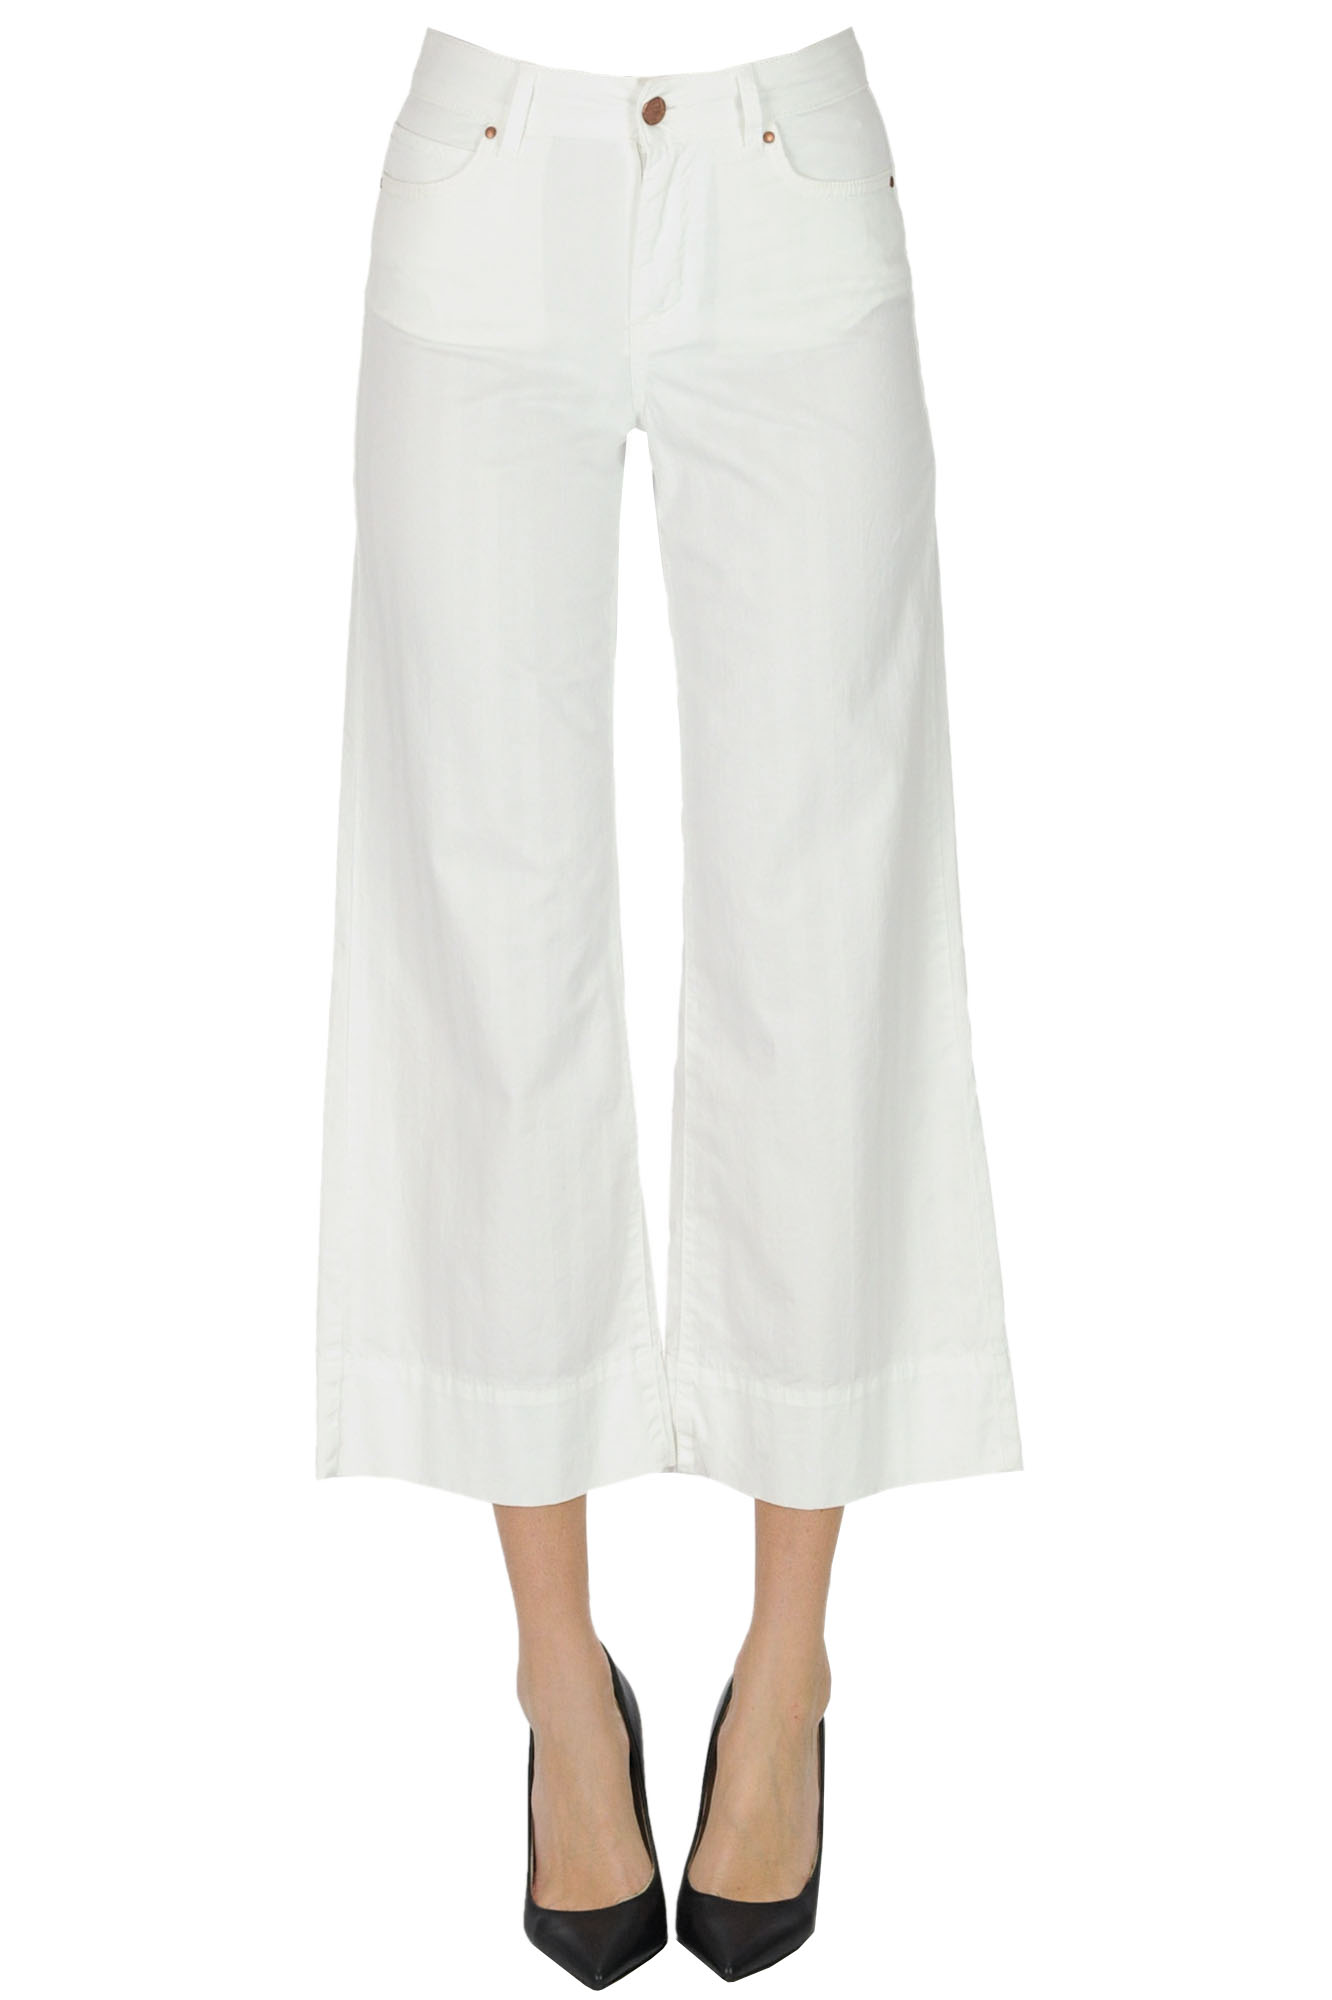 ATELIER CIGALA'S CROPPED COTTON TROUSERS